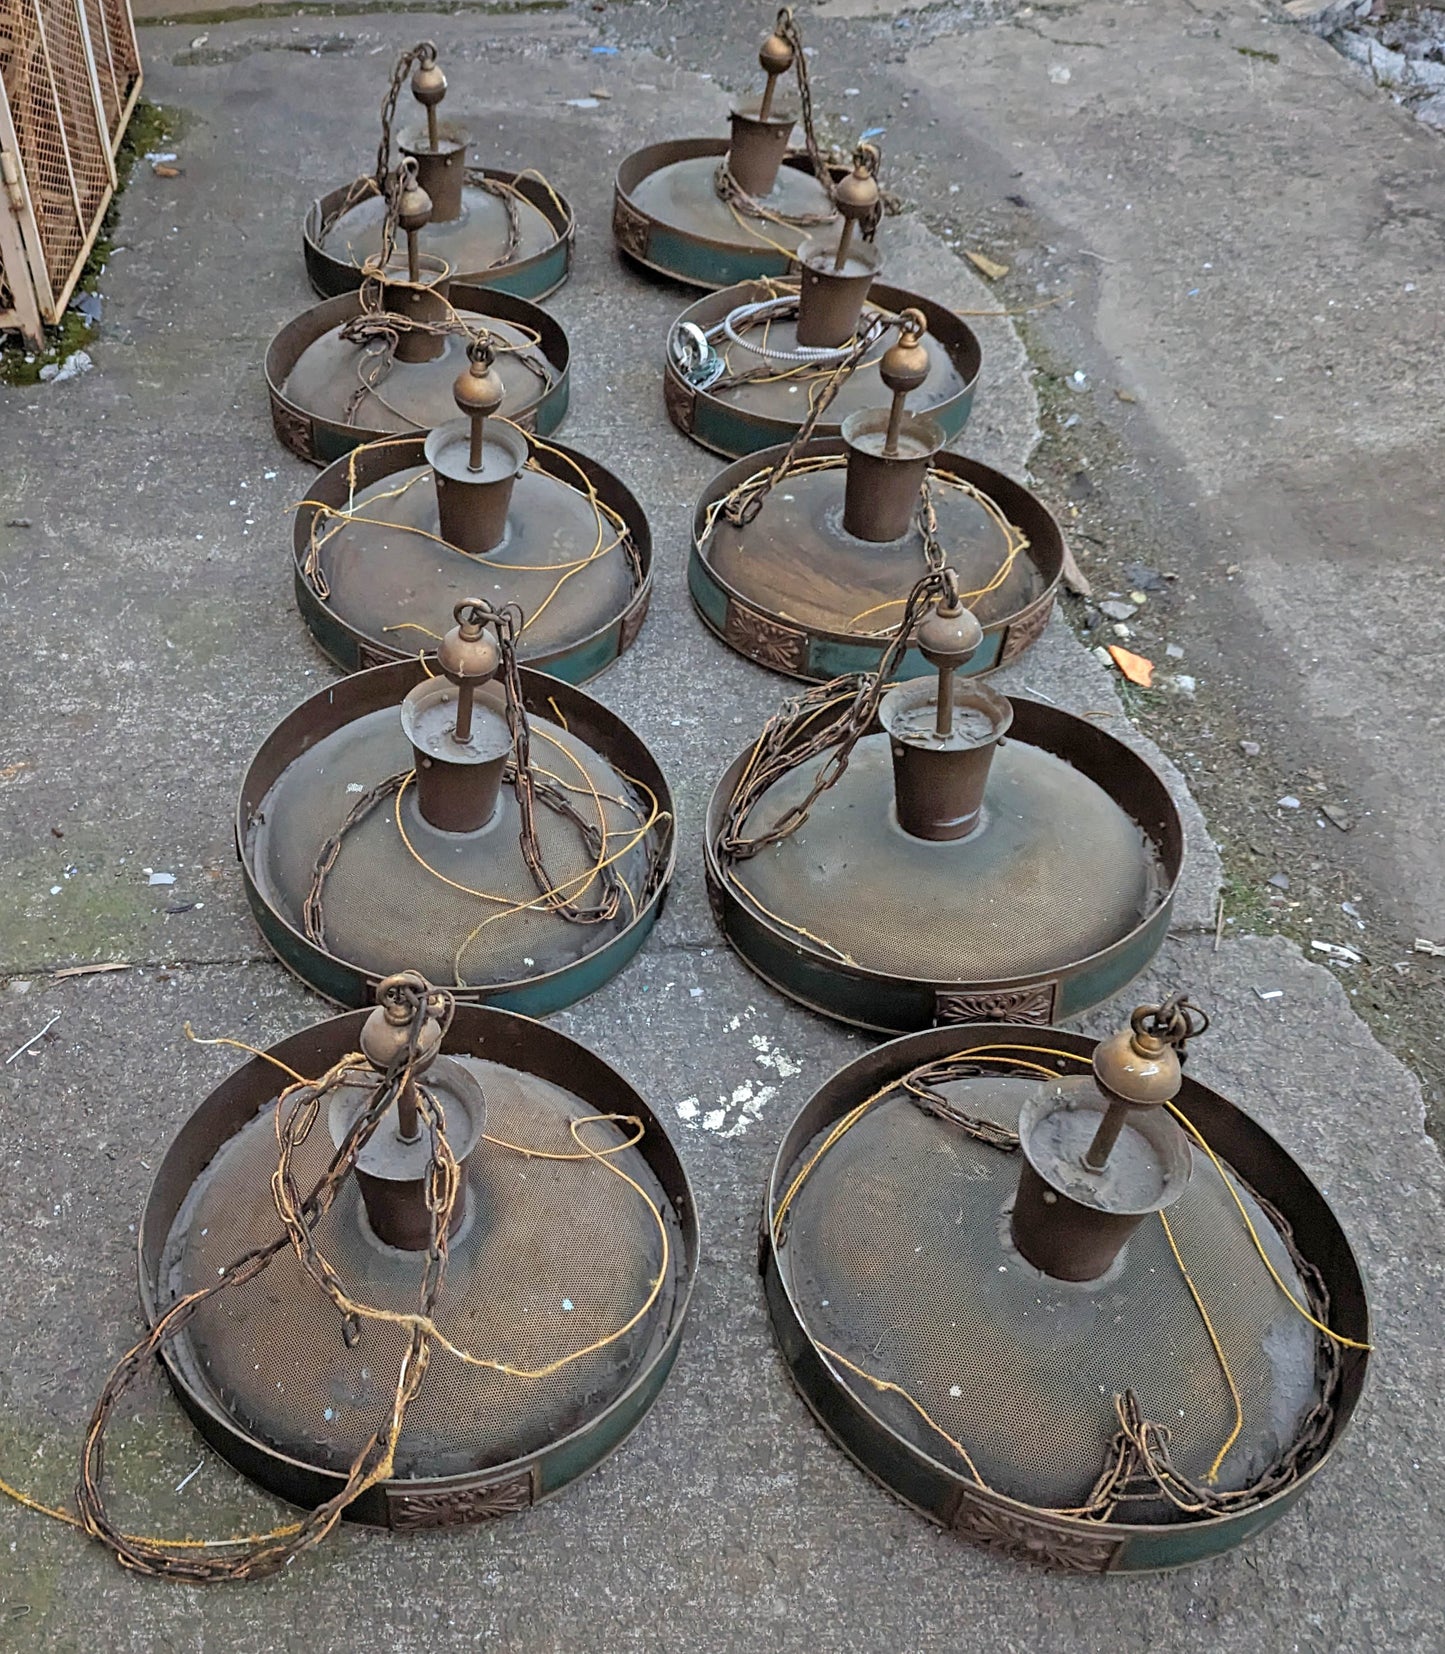 Lot of 10 Vintage Antique Old 24" Round Circular Hanging Ceiling Church Light Chandelier Lamp Fixtures Salvaged Reclaimed Lighting